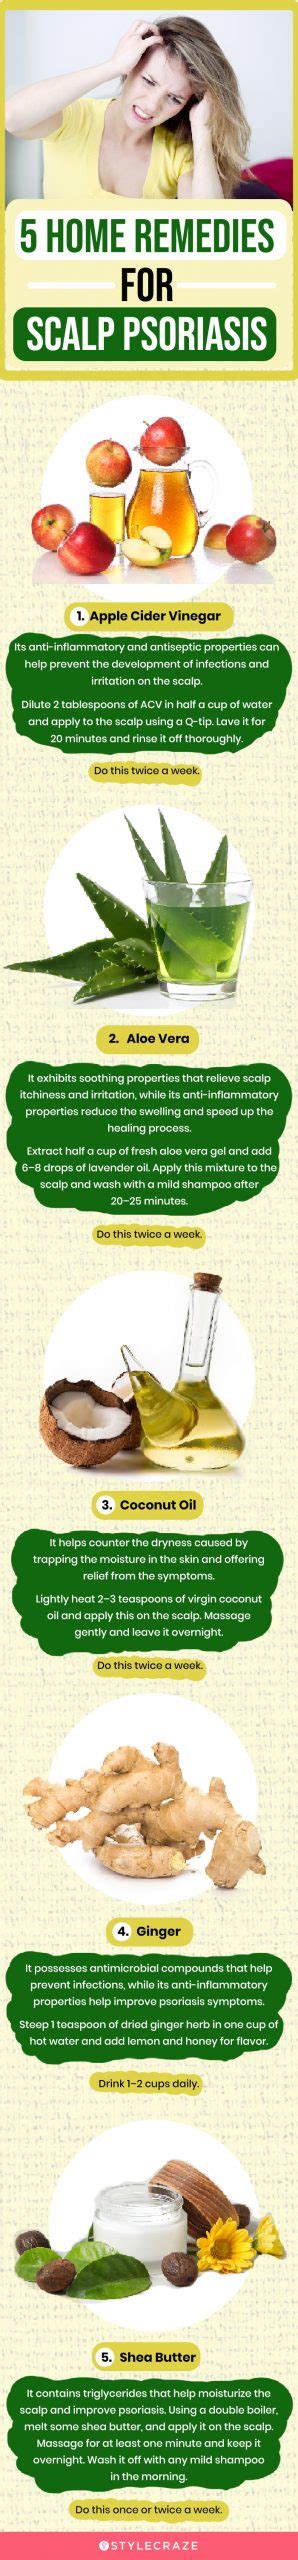 12 Home Remedies For Managing Scalp Psoriasis Effectively